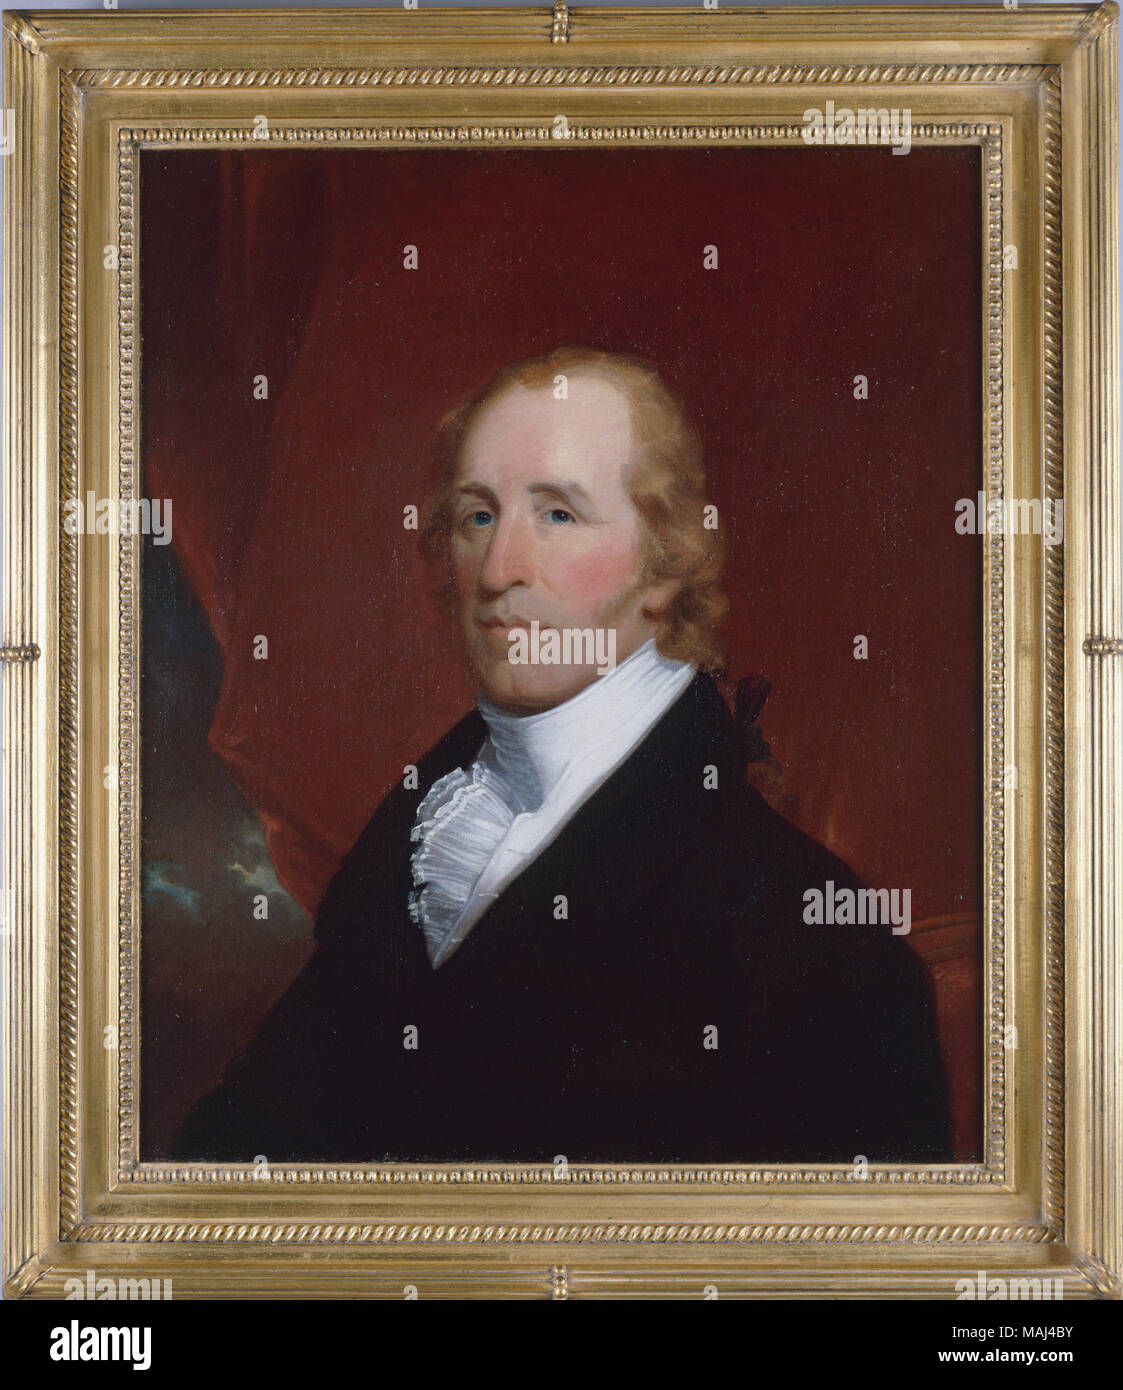 Portrait of William Clark attributed to John Wesley Jarvis. Clark and Meriwether Lewis led an expedition across the Louisiana Puchase to the Pacific Ocean in 1803-1805. Later Clark served as the governor of the Missouri Territory and Superintendent of Indian Affairs. Also large, rectangular wood frame (b), painted gold and decorated with flourishes original to the painting. Title: Portrait of William Clark  . circa 1810. Jarvis, John Wesley, 1780-1840 Stock Photo